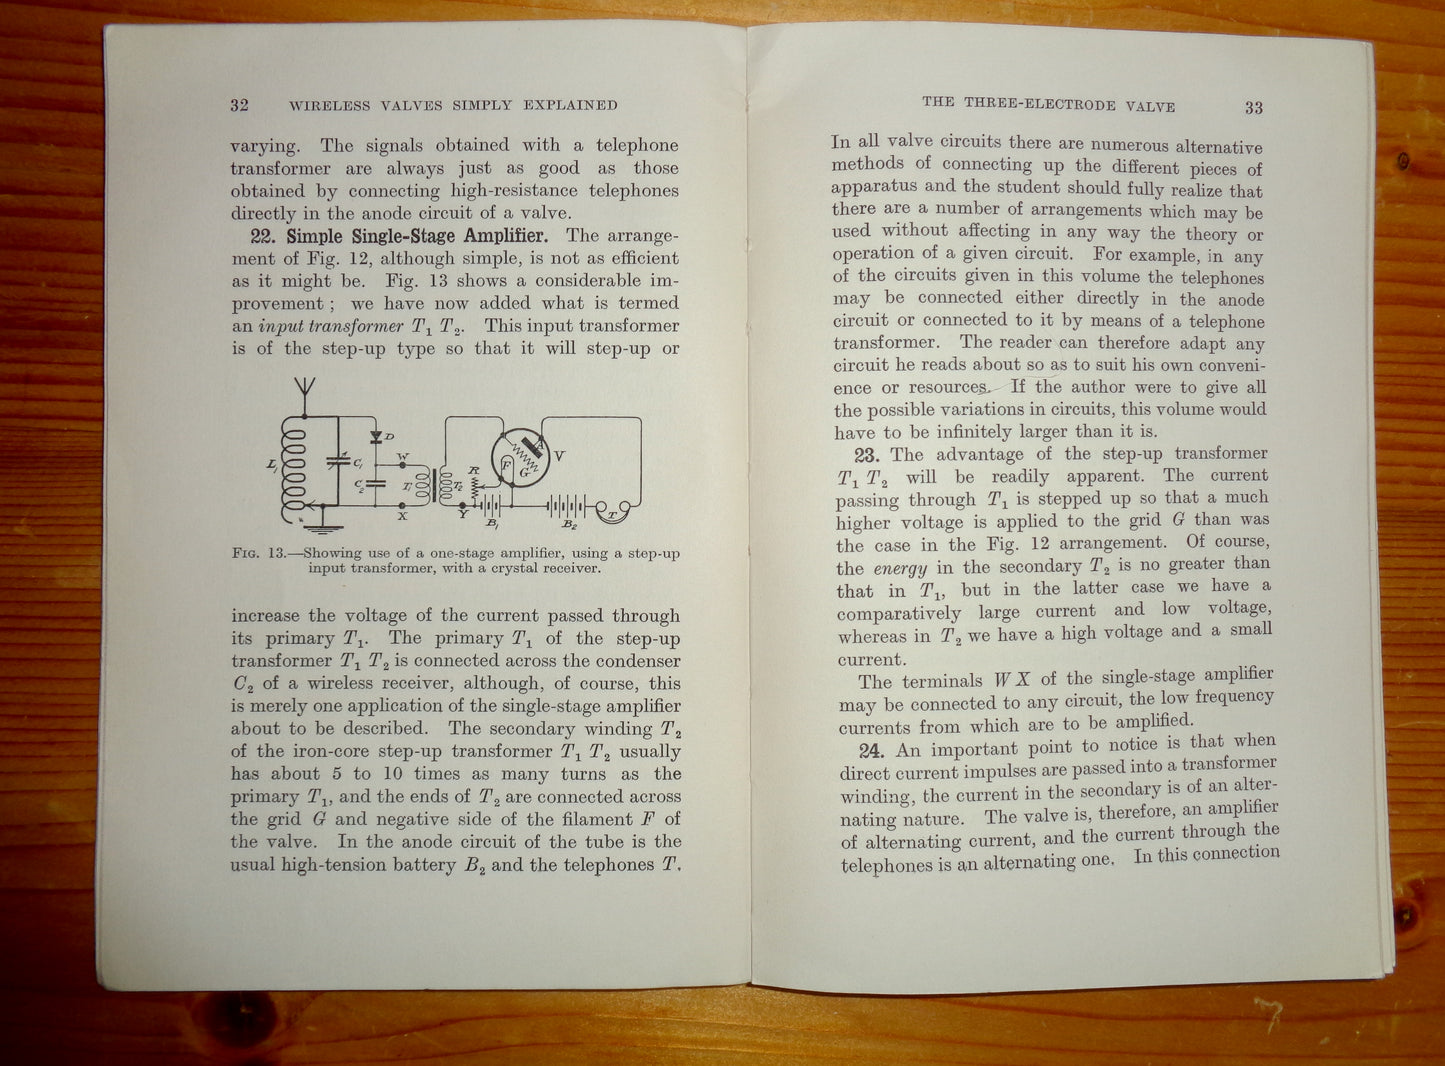 1922 Wireless Valves Simply Explained By John Scott-Taggart